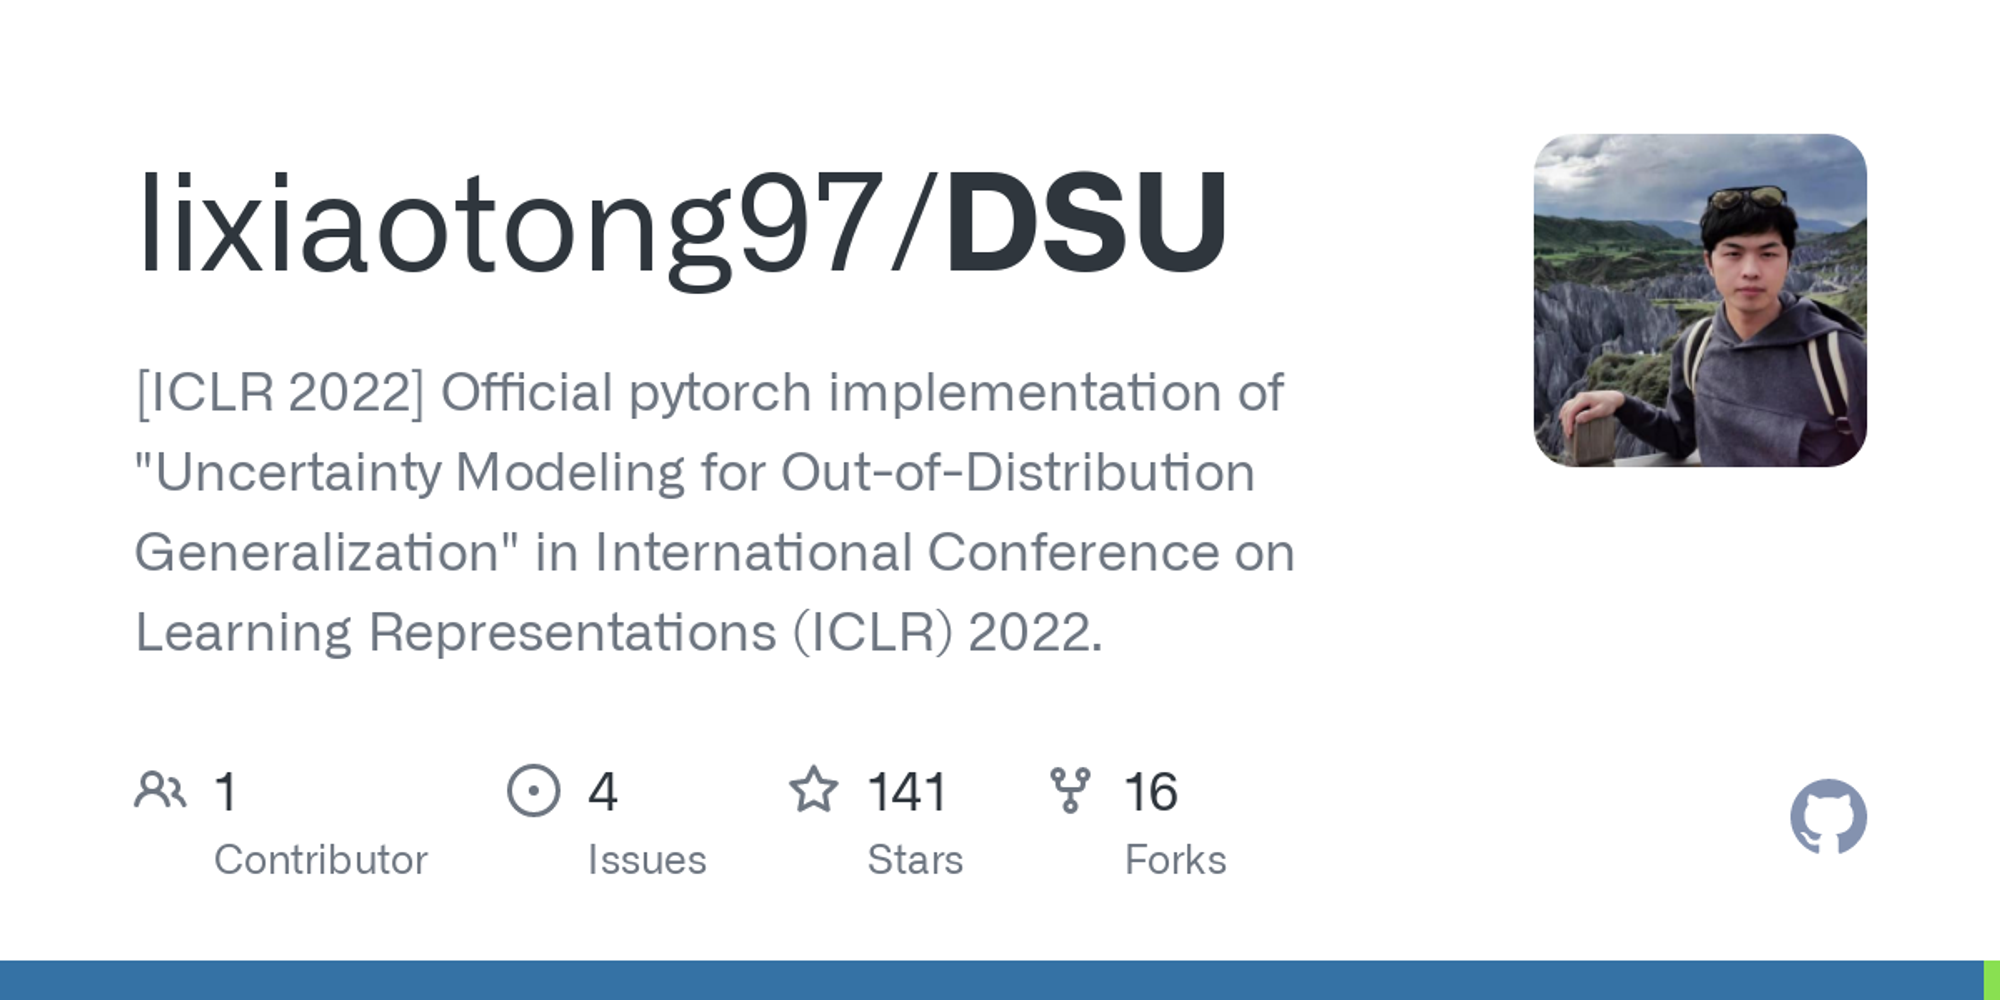 GitHub - lixiaotong97/DSU: [ICLR 2022] Official pytorch implementation of "Uncertainty Modeling for Out-of-Distribution Generalization" in International Conference on Learning Representations (ICLR) 2022.